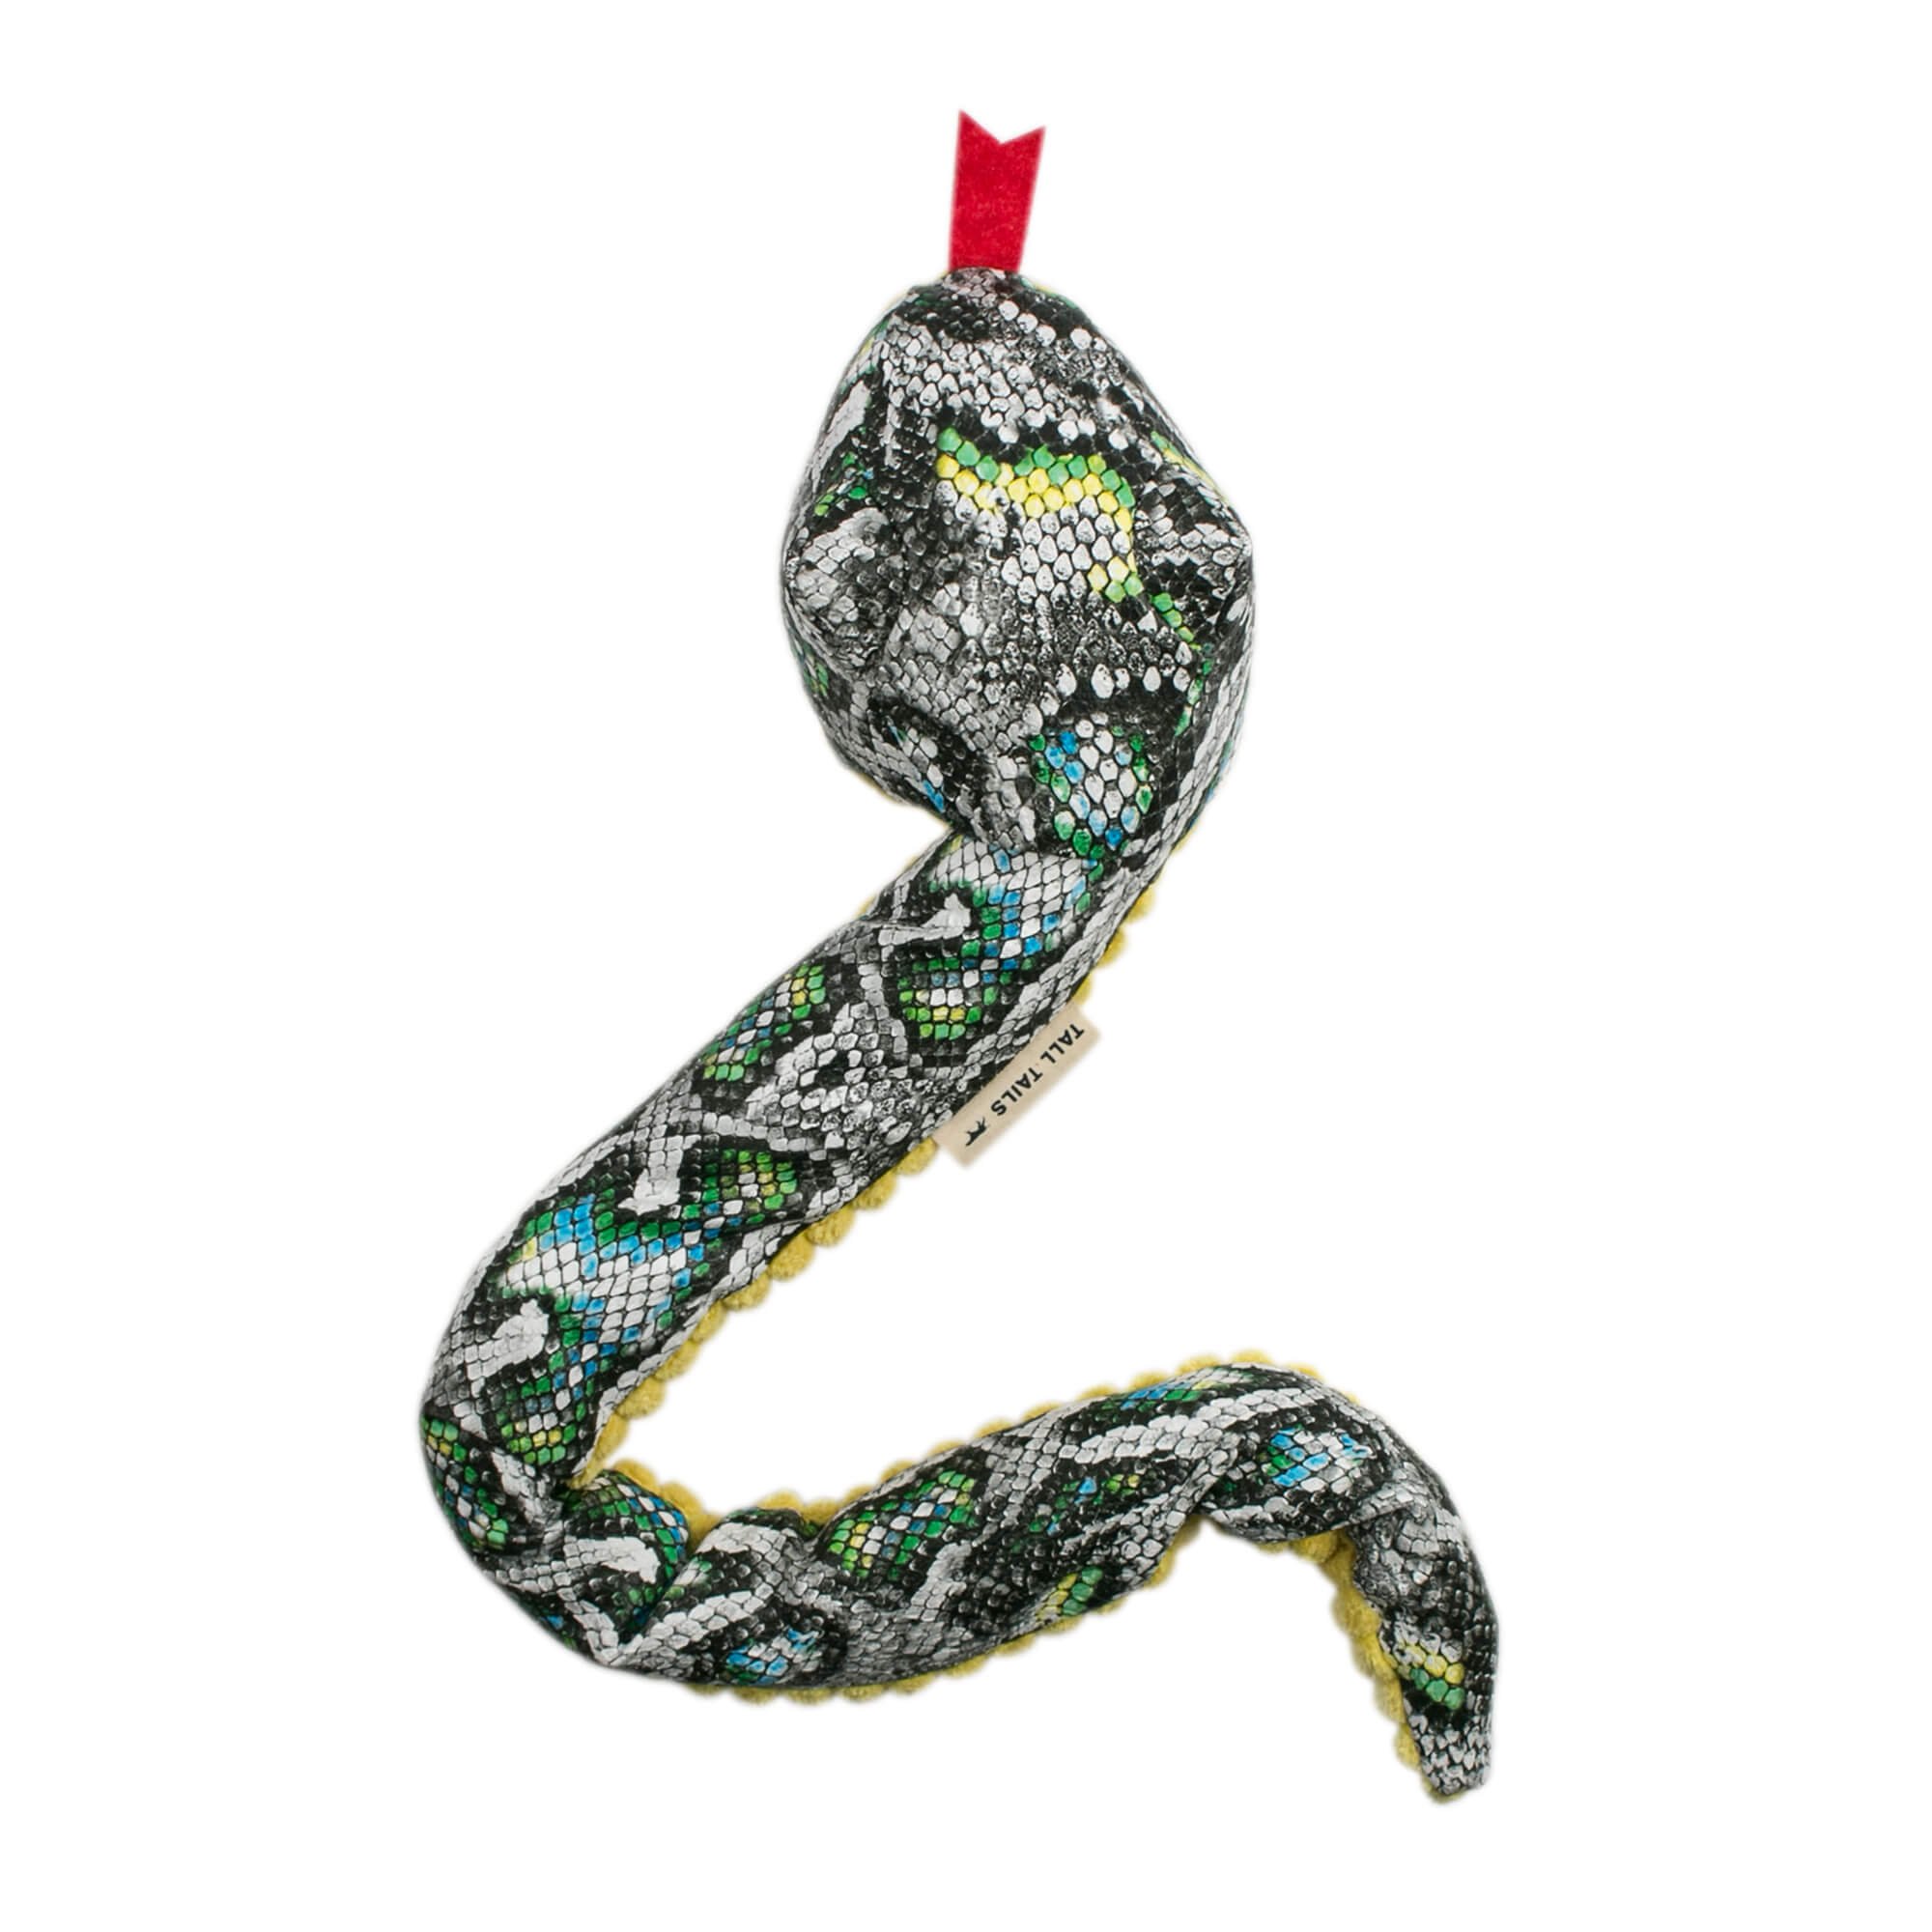 Tall Tails crunch snake dog toy vertical